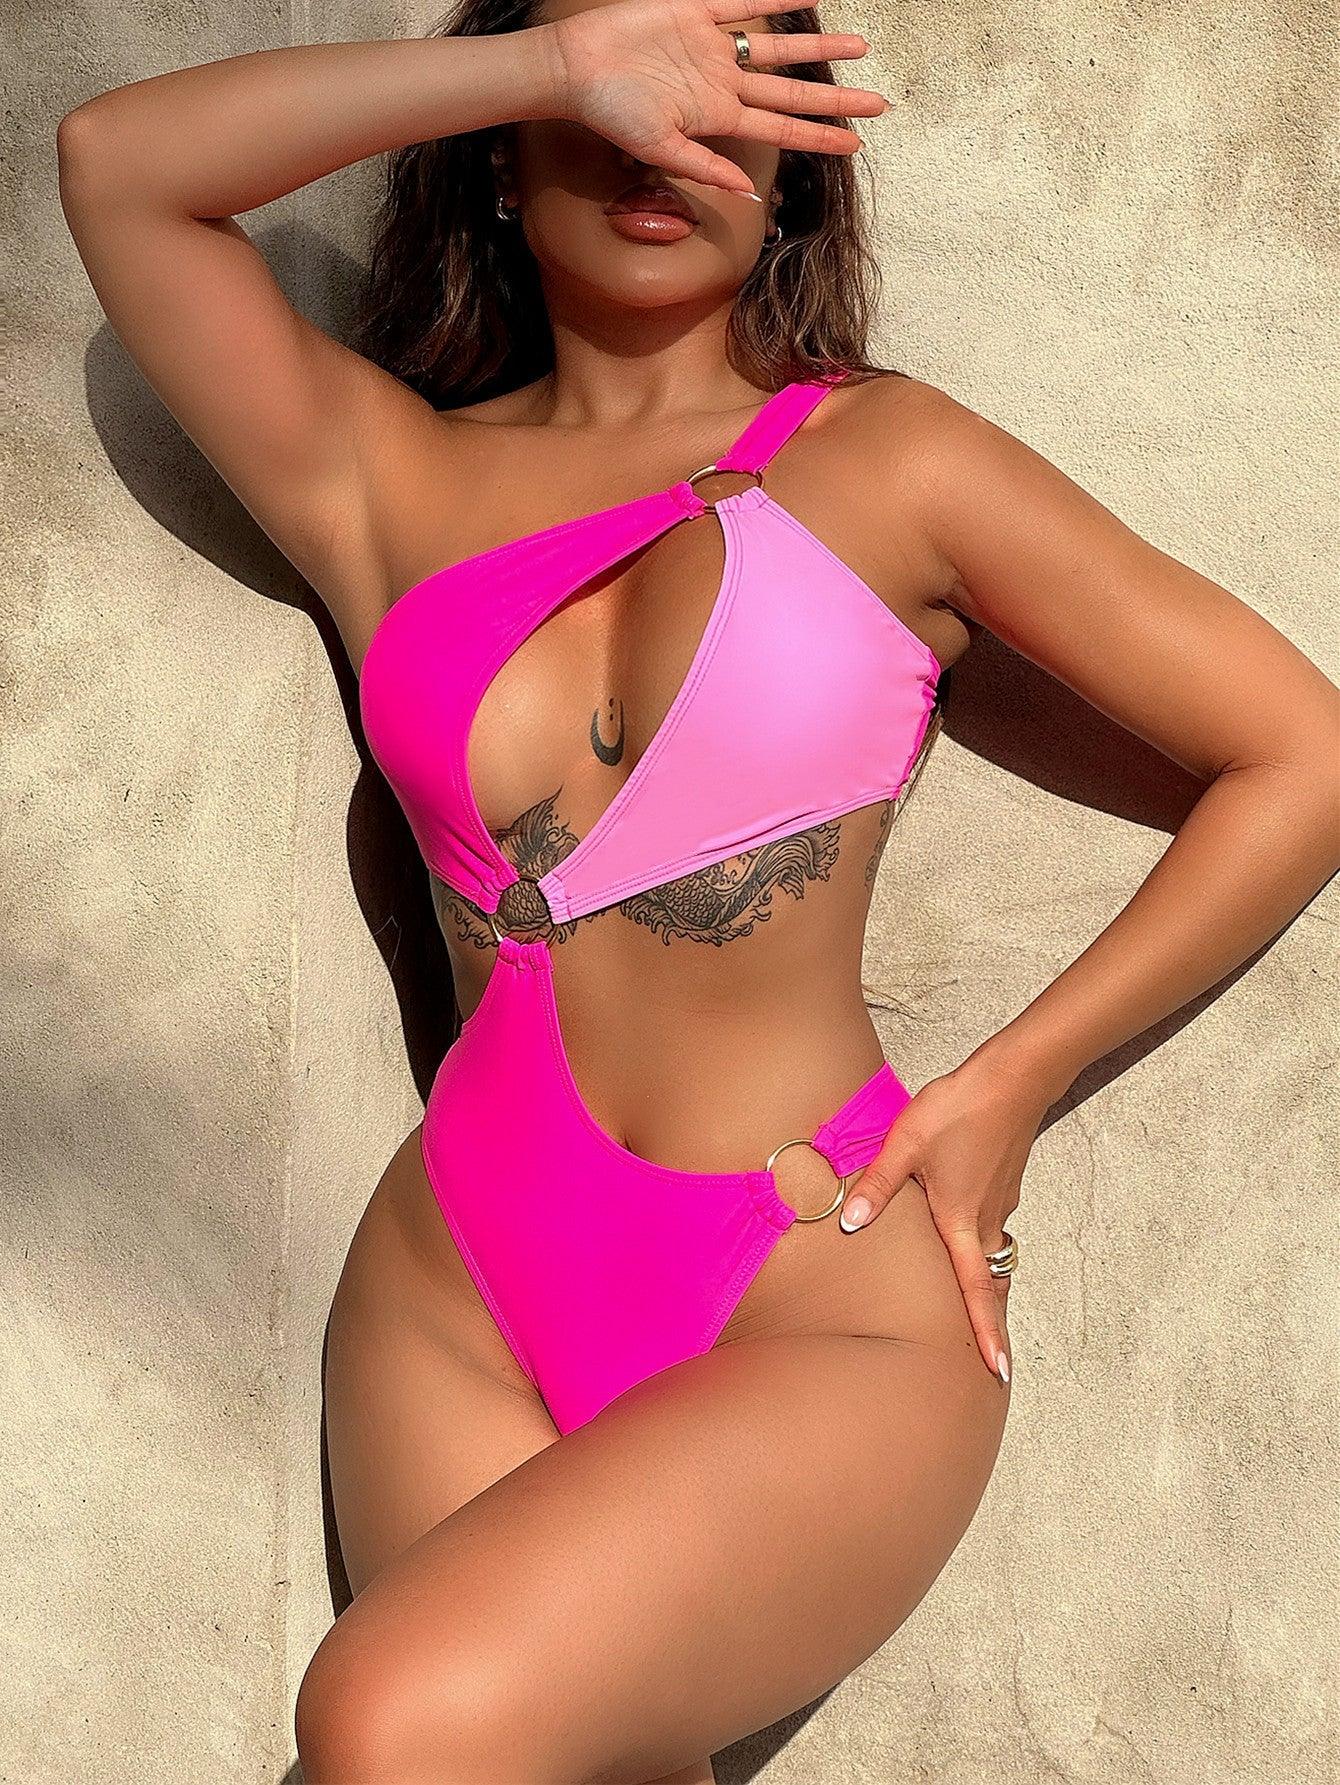 a woman in a pink swimsuit posing for a picture